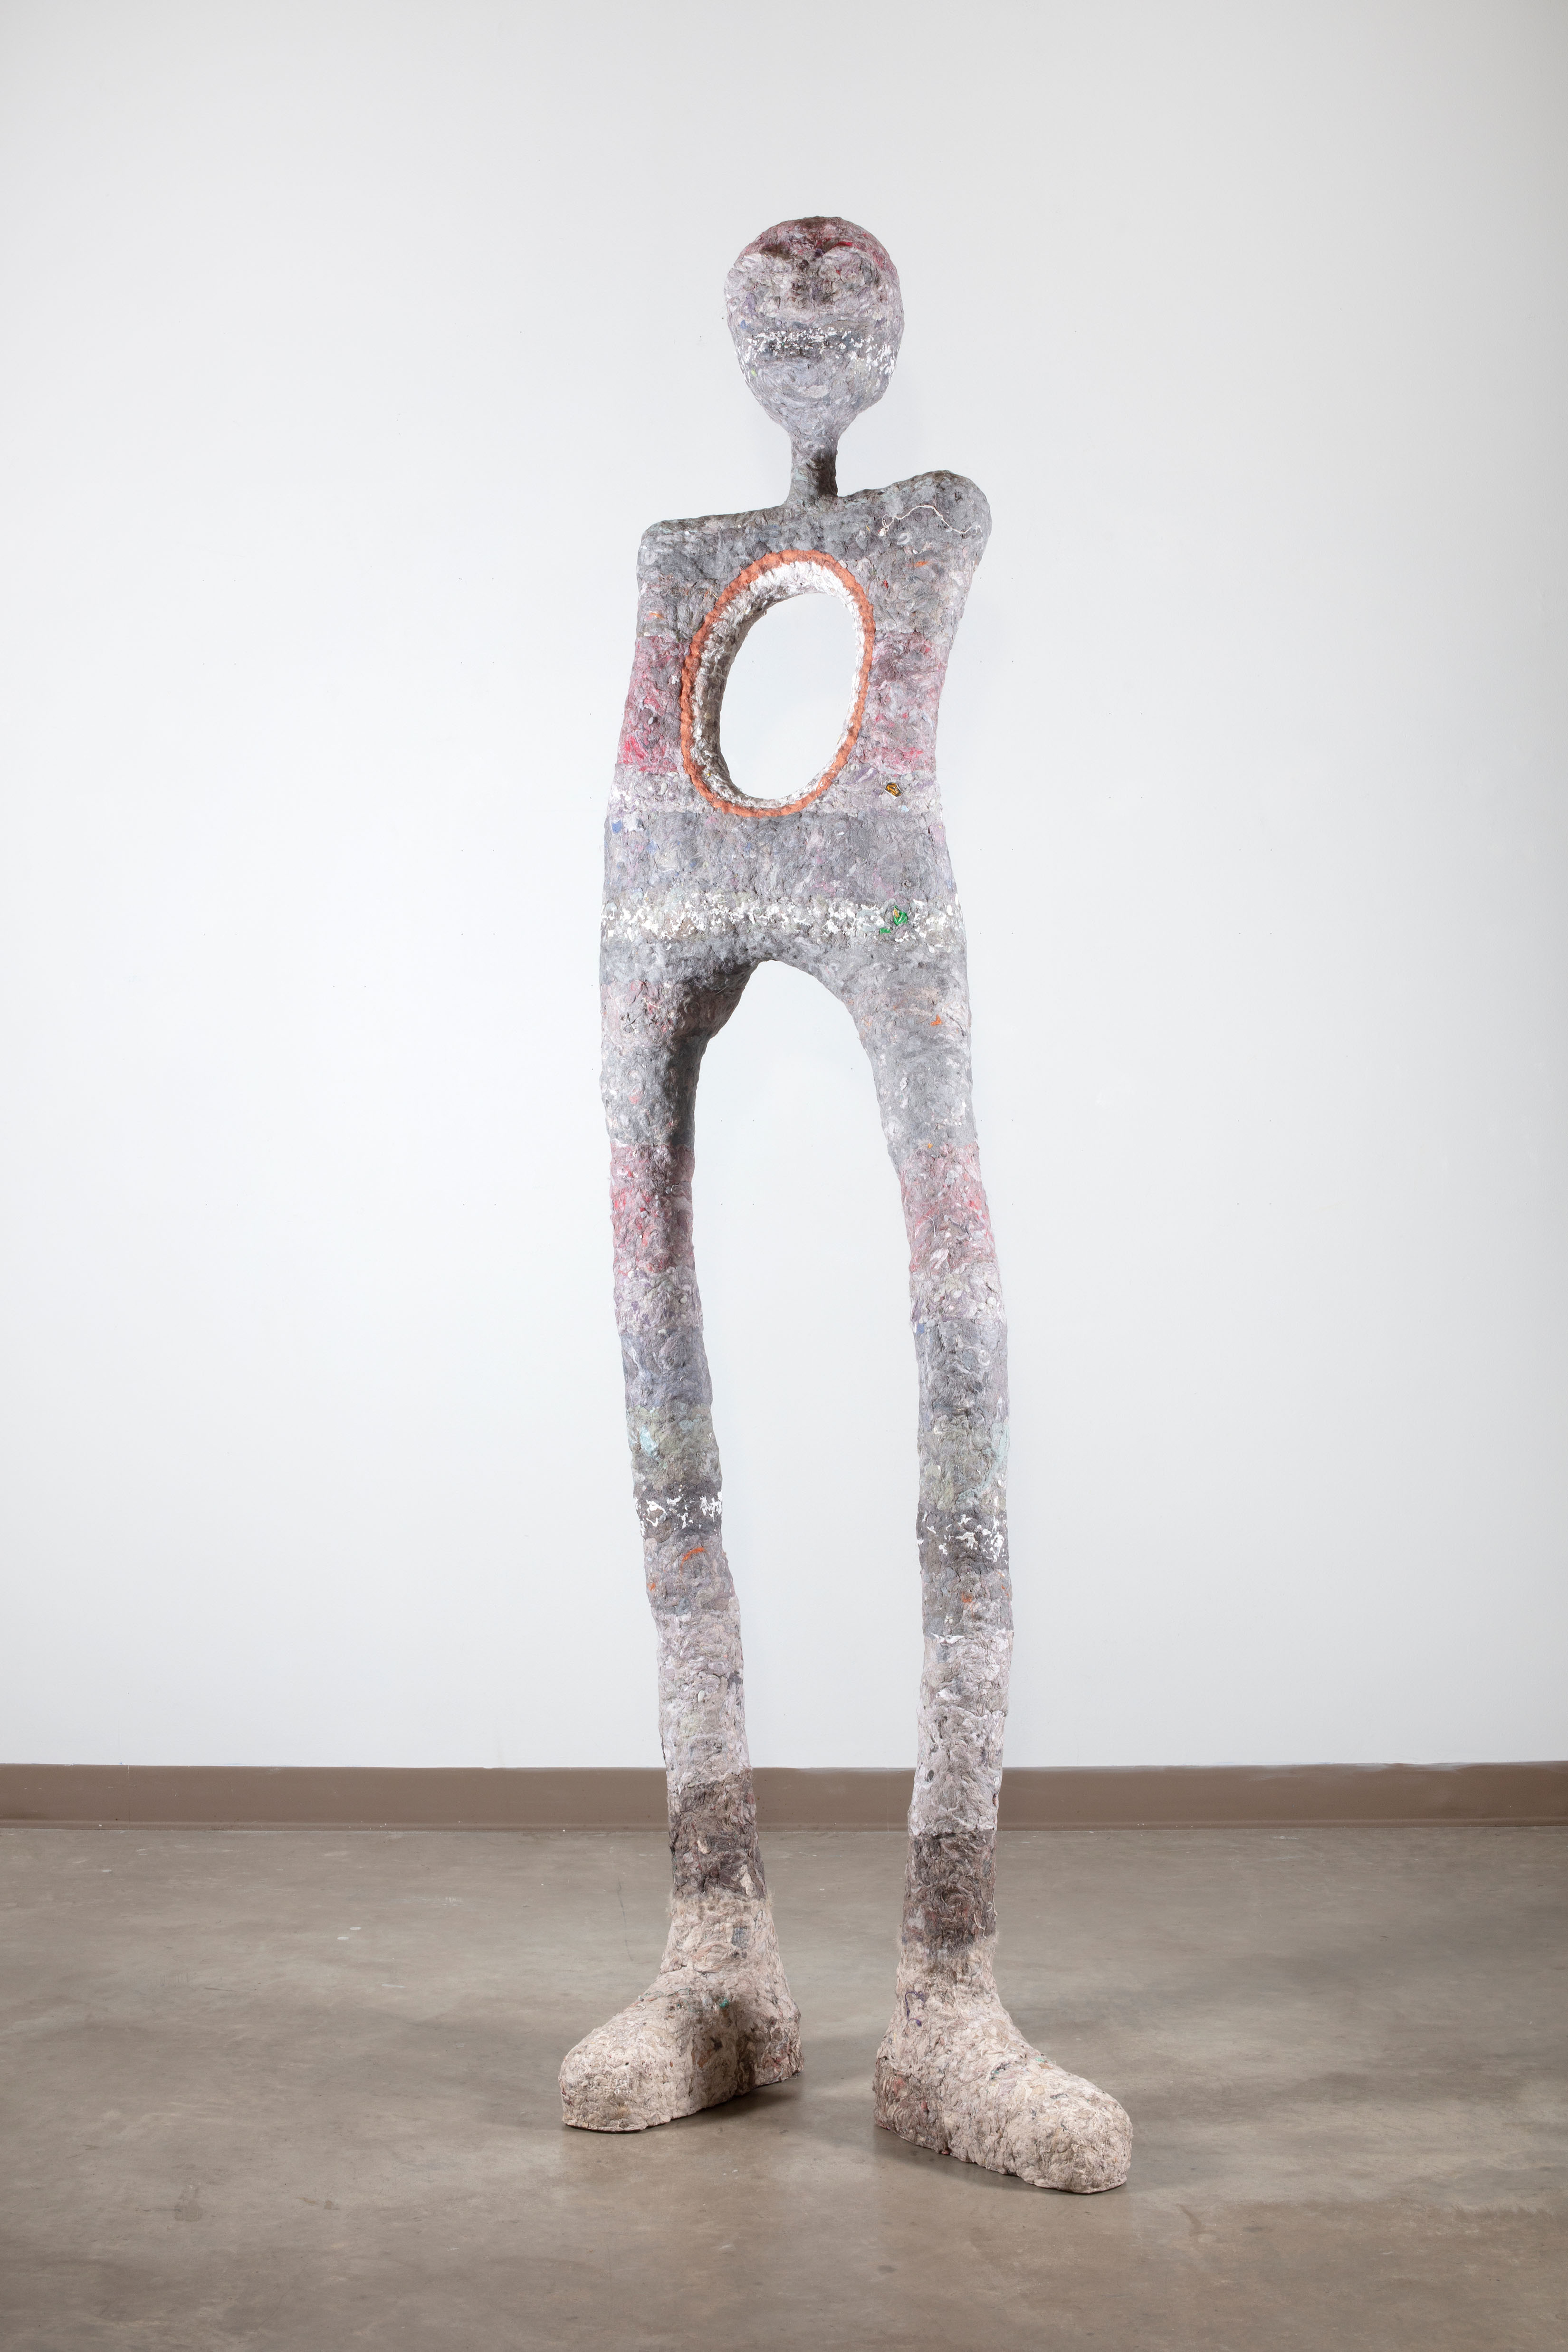 Cheryl Capezzuti’s 2021 dryer lint sculpture Bipedal, Heroic V will appear in Hereafter at Craft Contemporary in Pittsburgh. 92 x 28 x 24 in. Photo courtesy of the artist.                                   